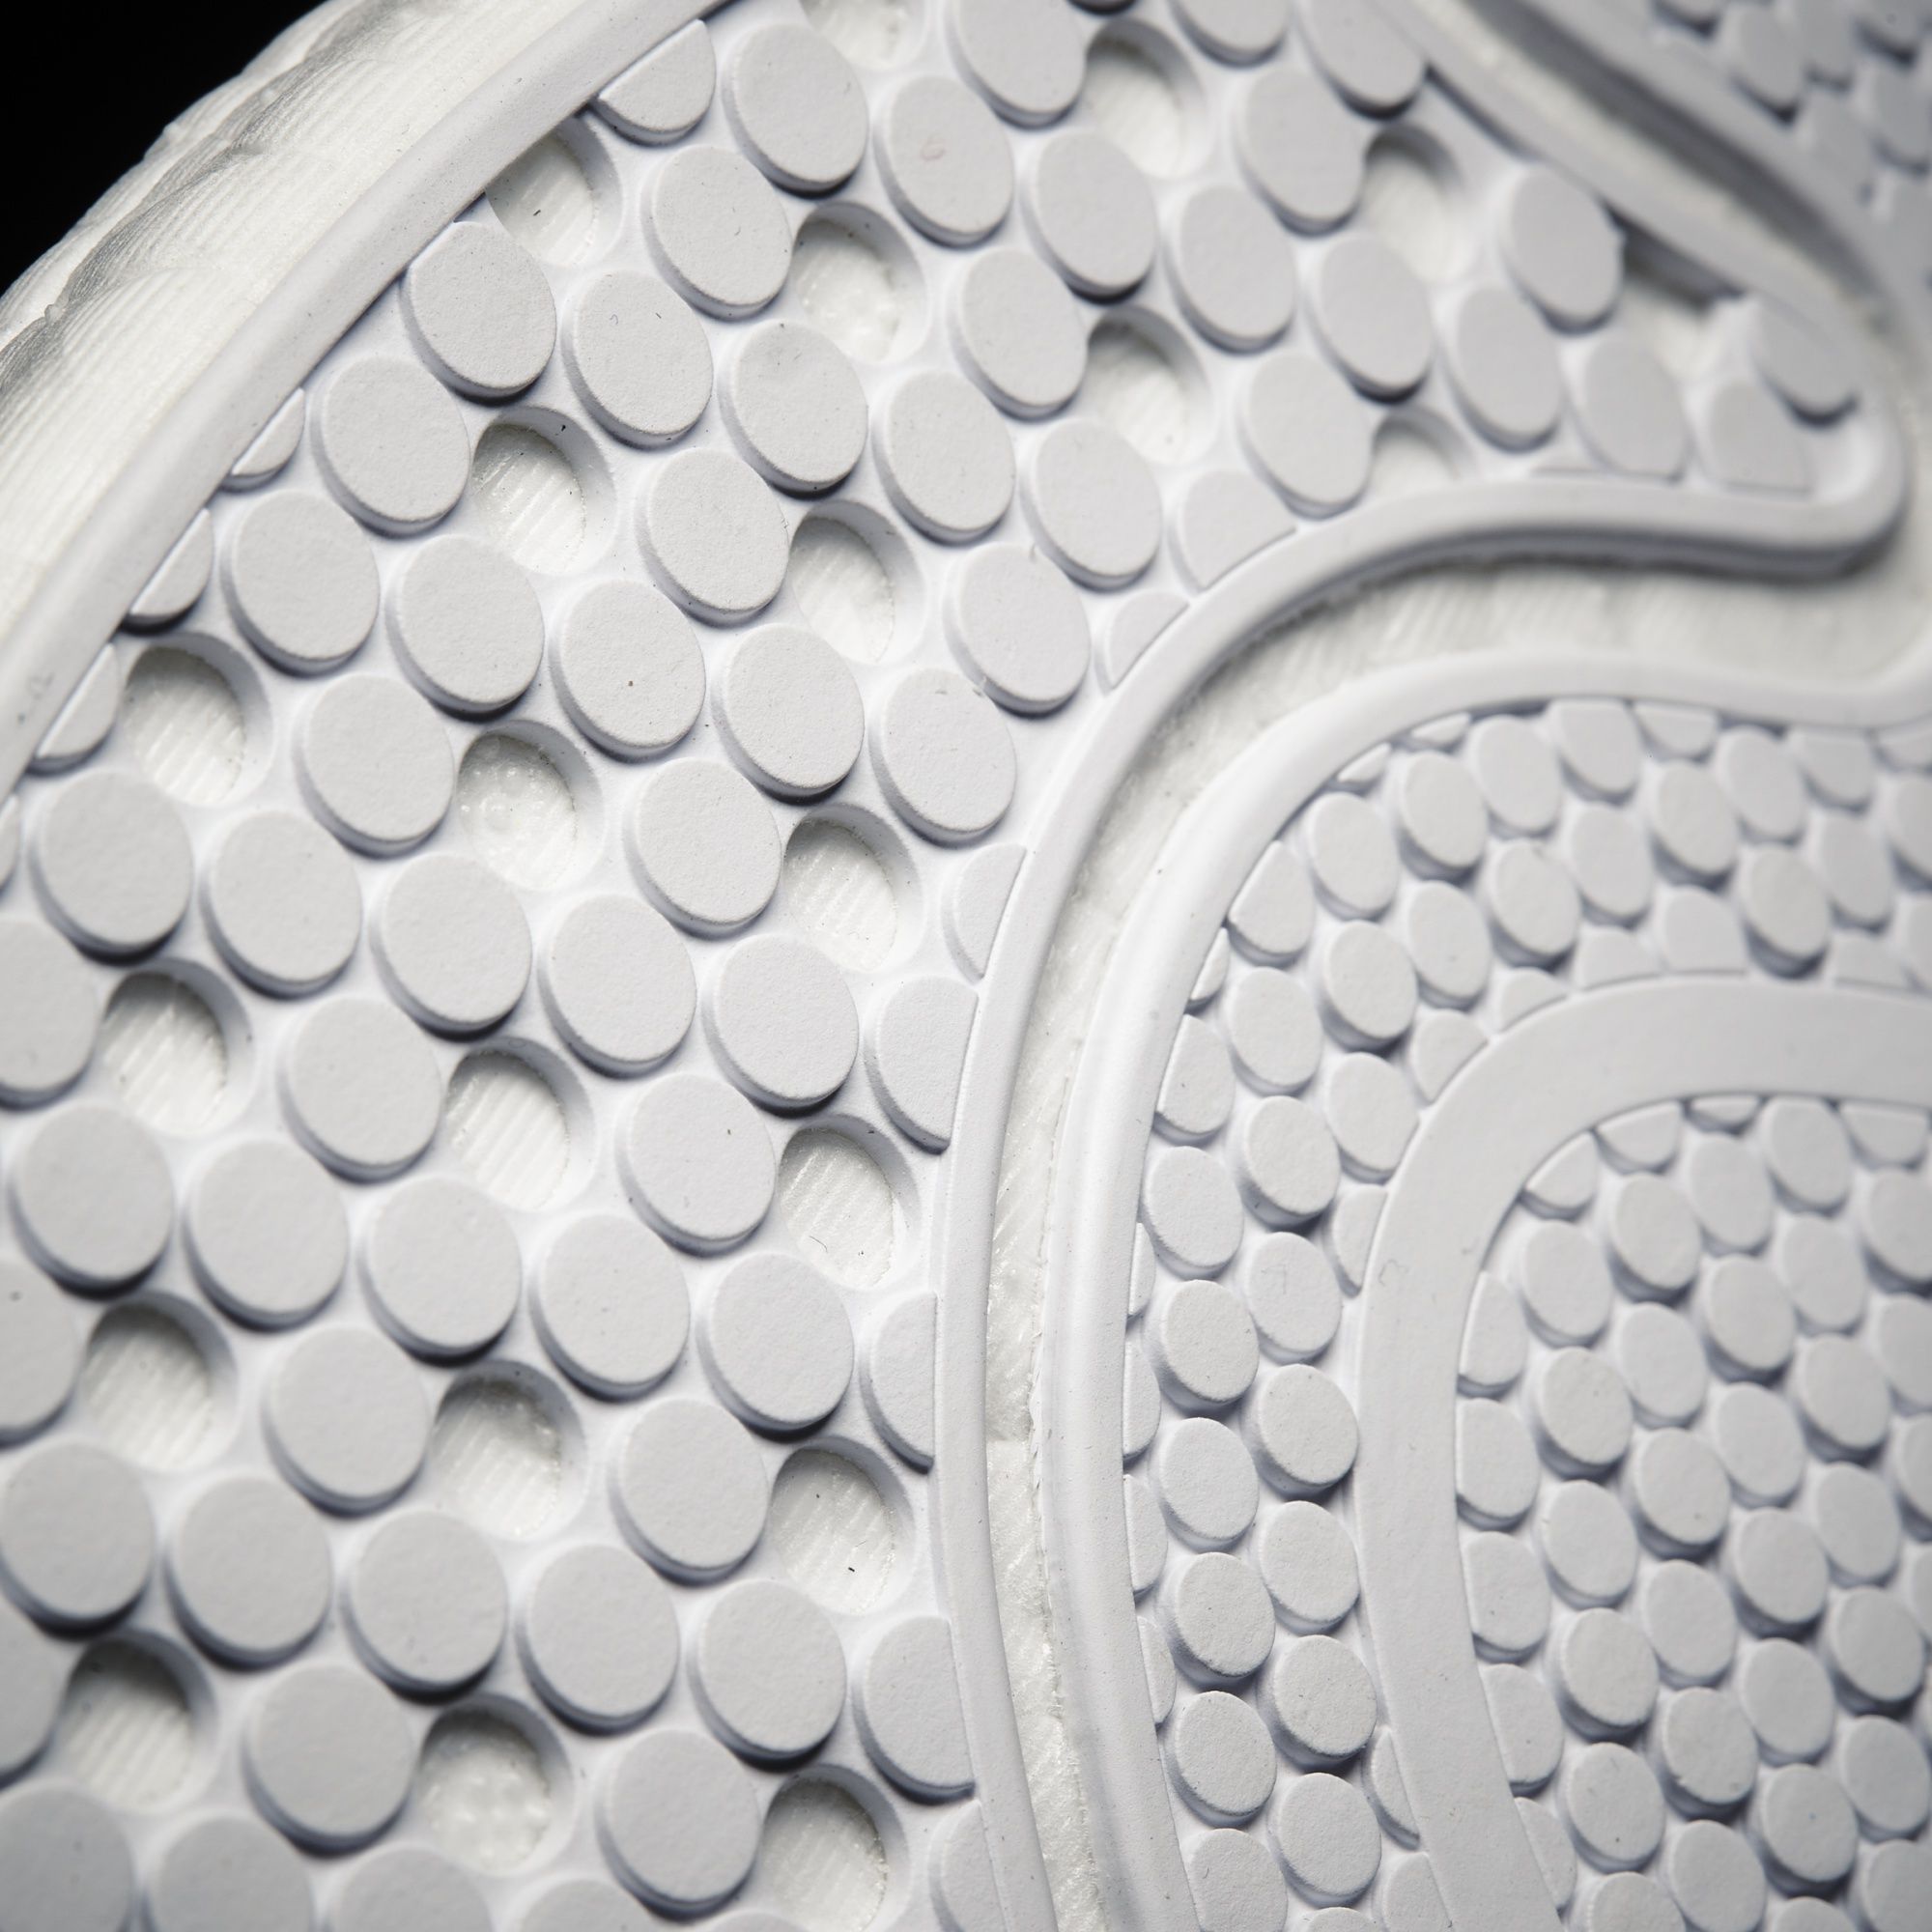 Adidas Stan Smith Boost BB0008 Sole Detail